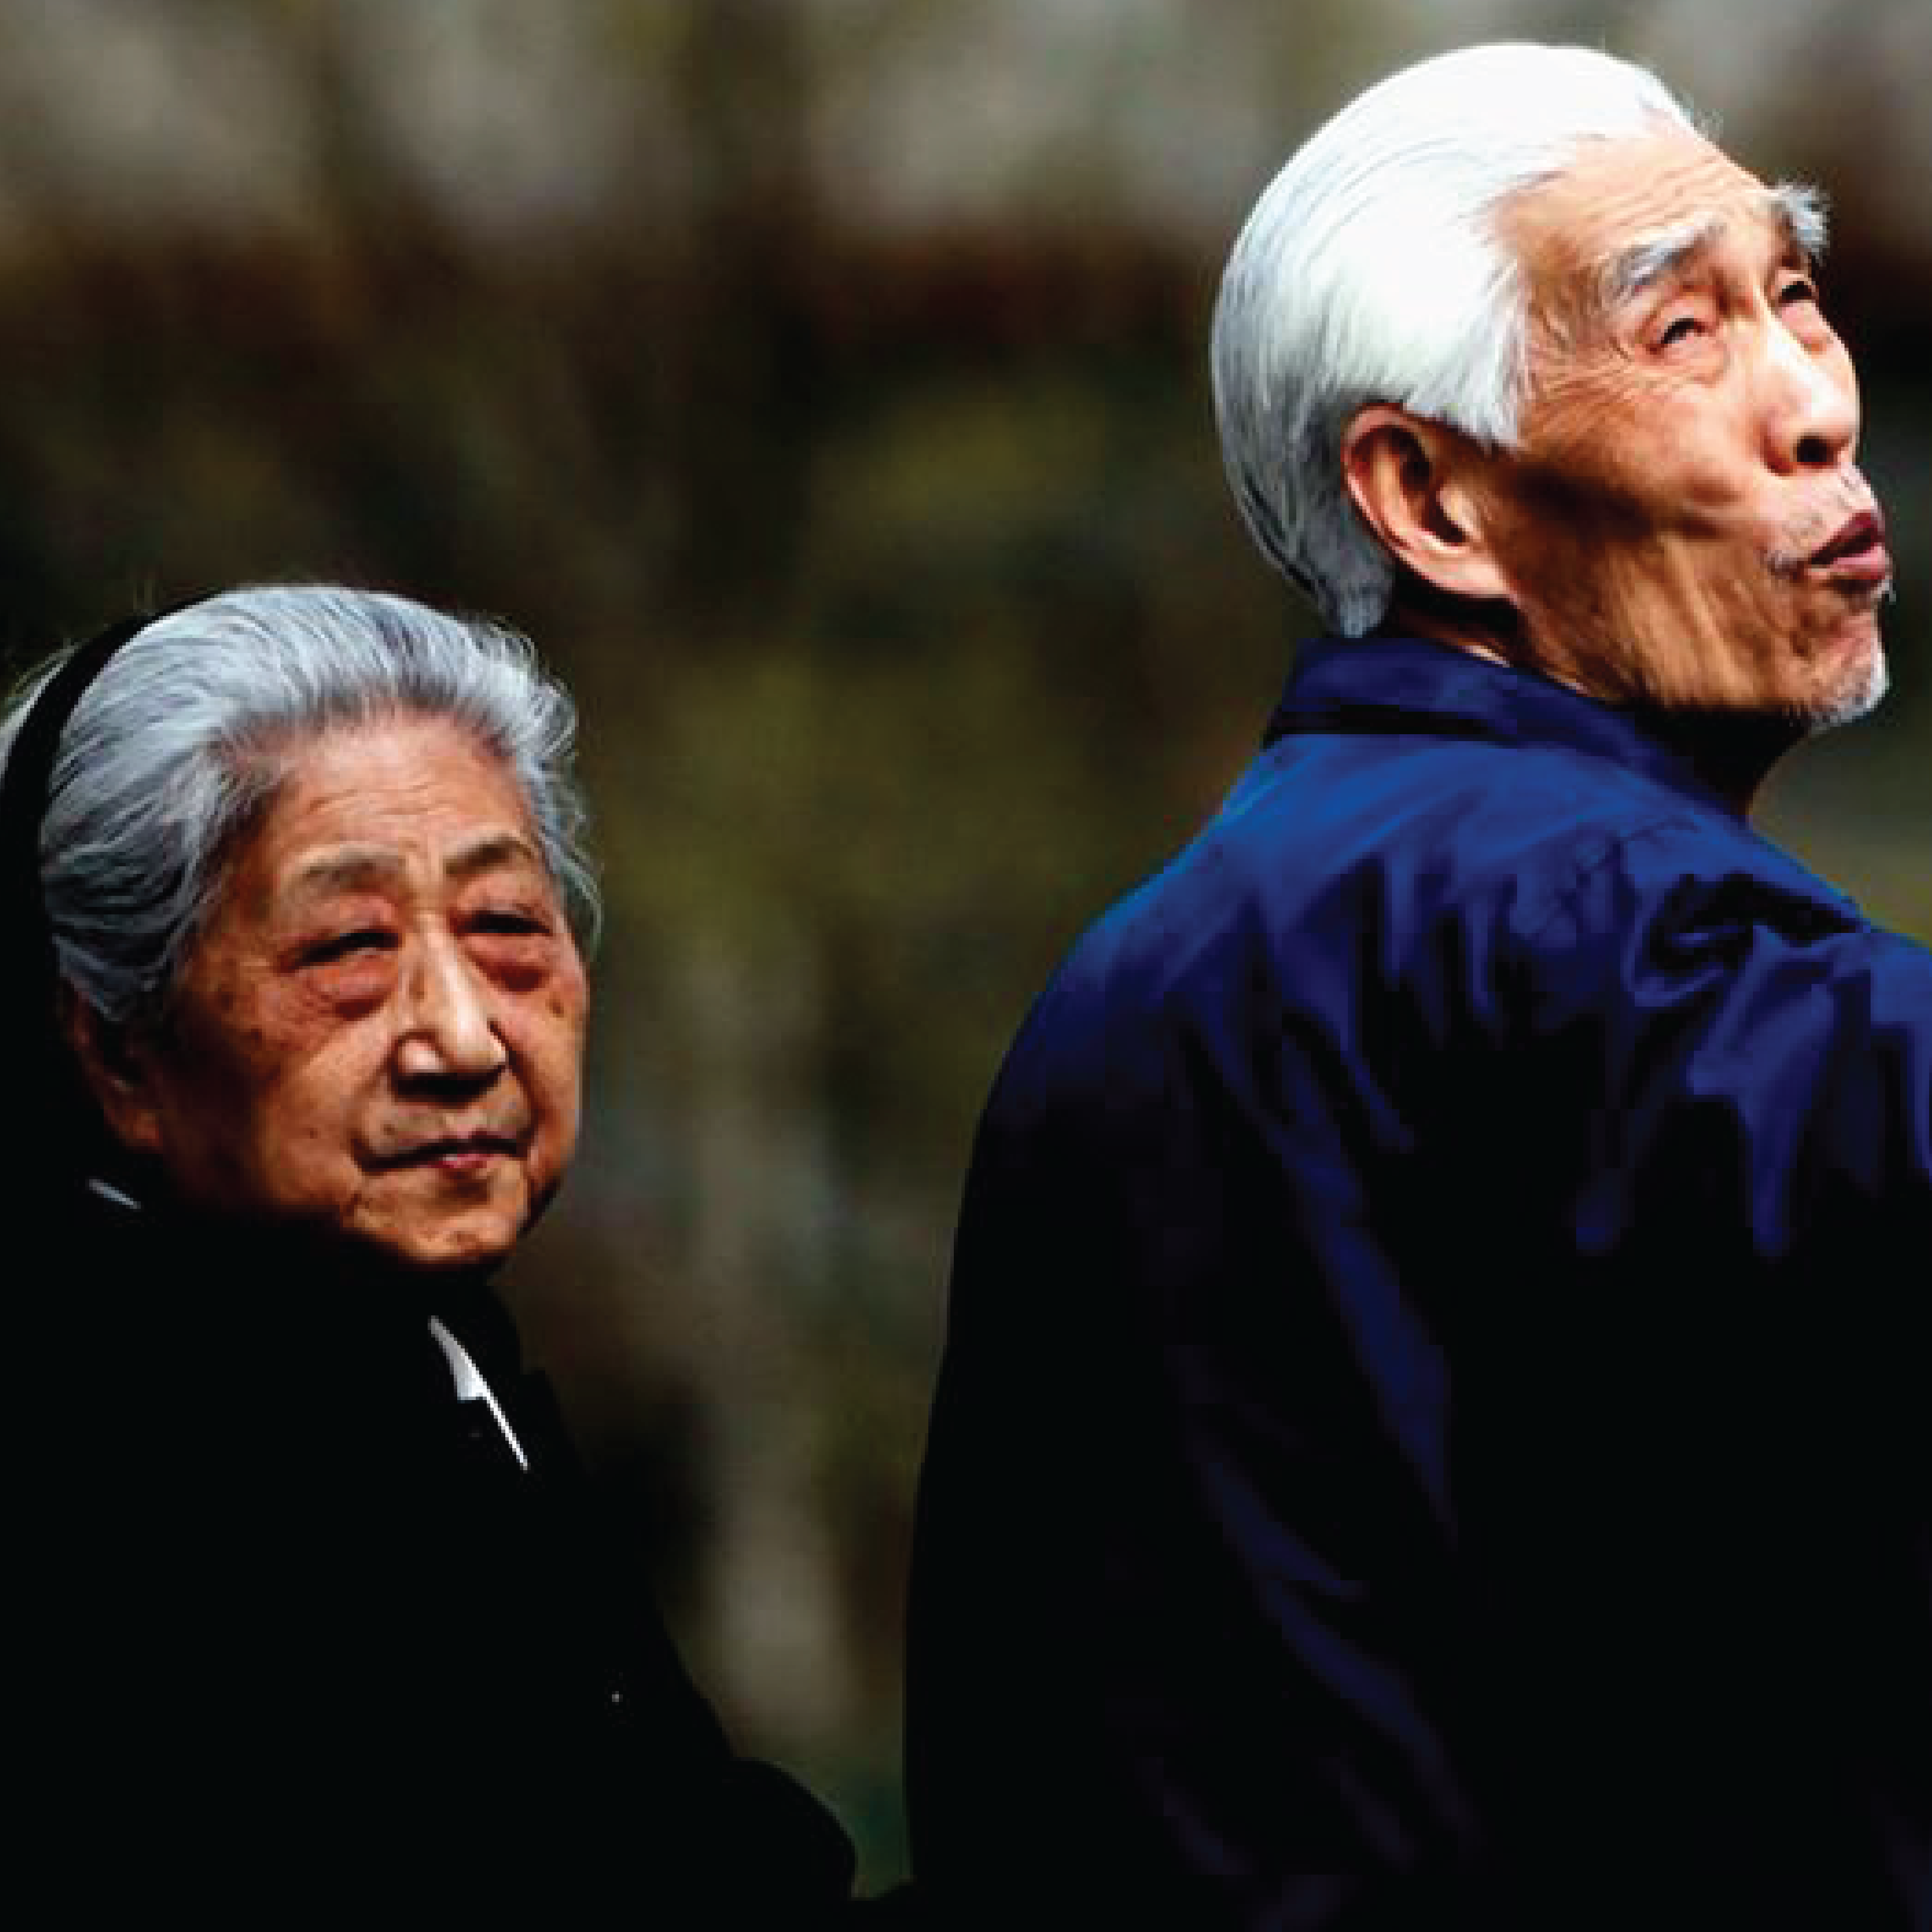 © UNFPA China Population ageing is a defining global trend of our time. People are living longer and more are older than ever before.